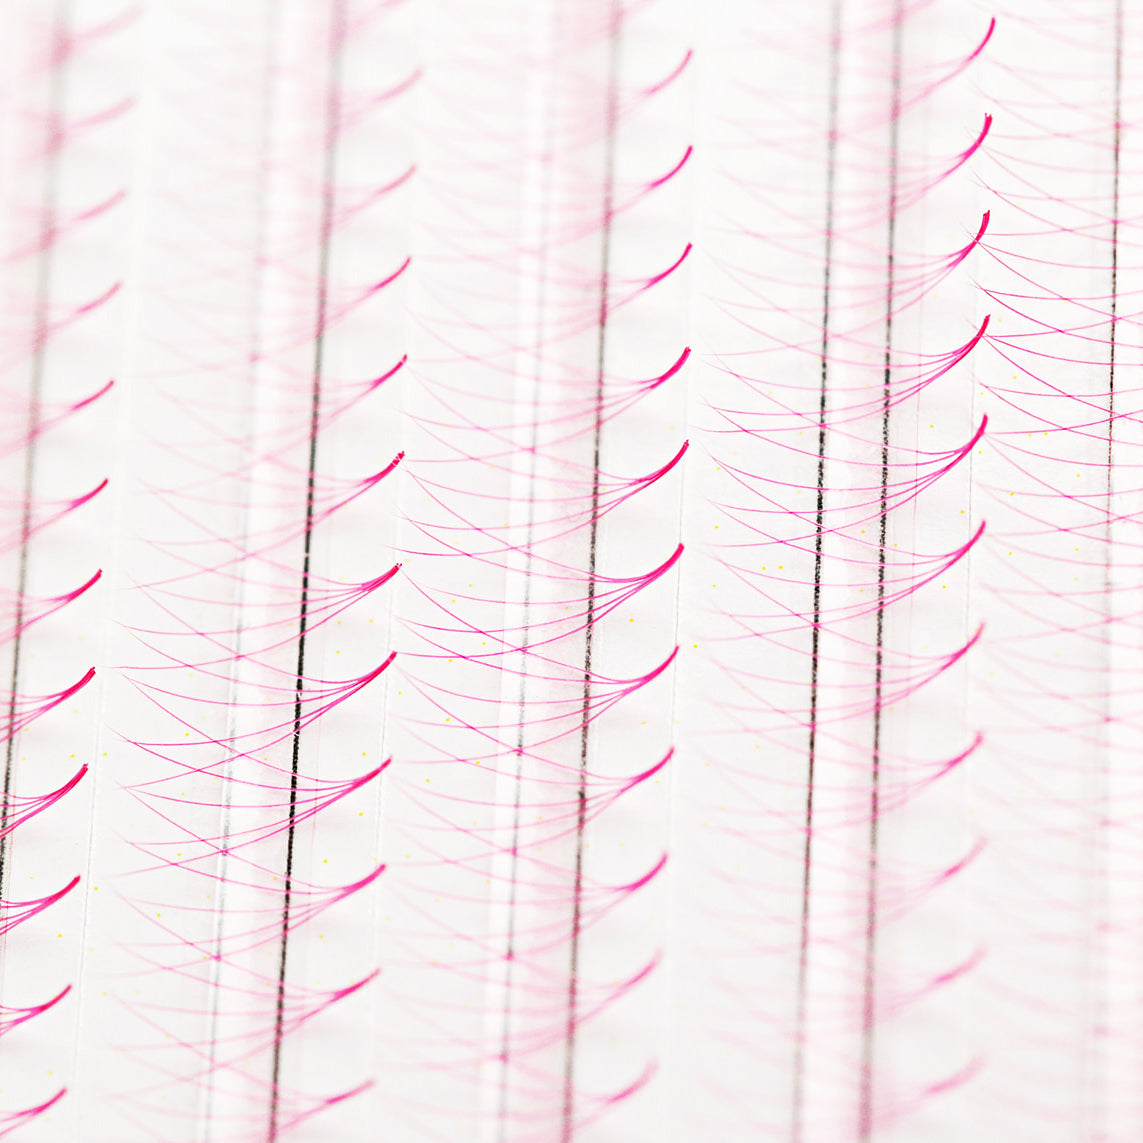 The Bold Collection: Pink 5D ProMade  Fans - Mix Length - 0.07